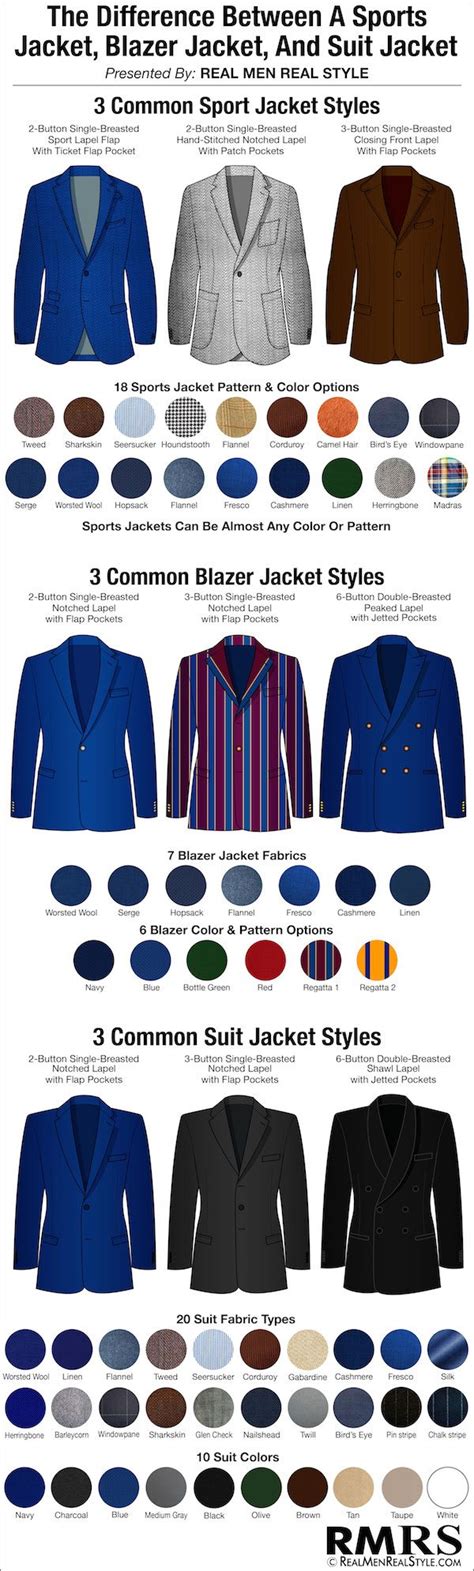 Differences Between A Suit Jacket Blazer Jacket And Sports Jacket